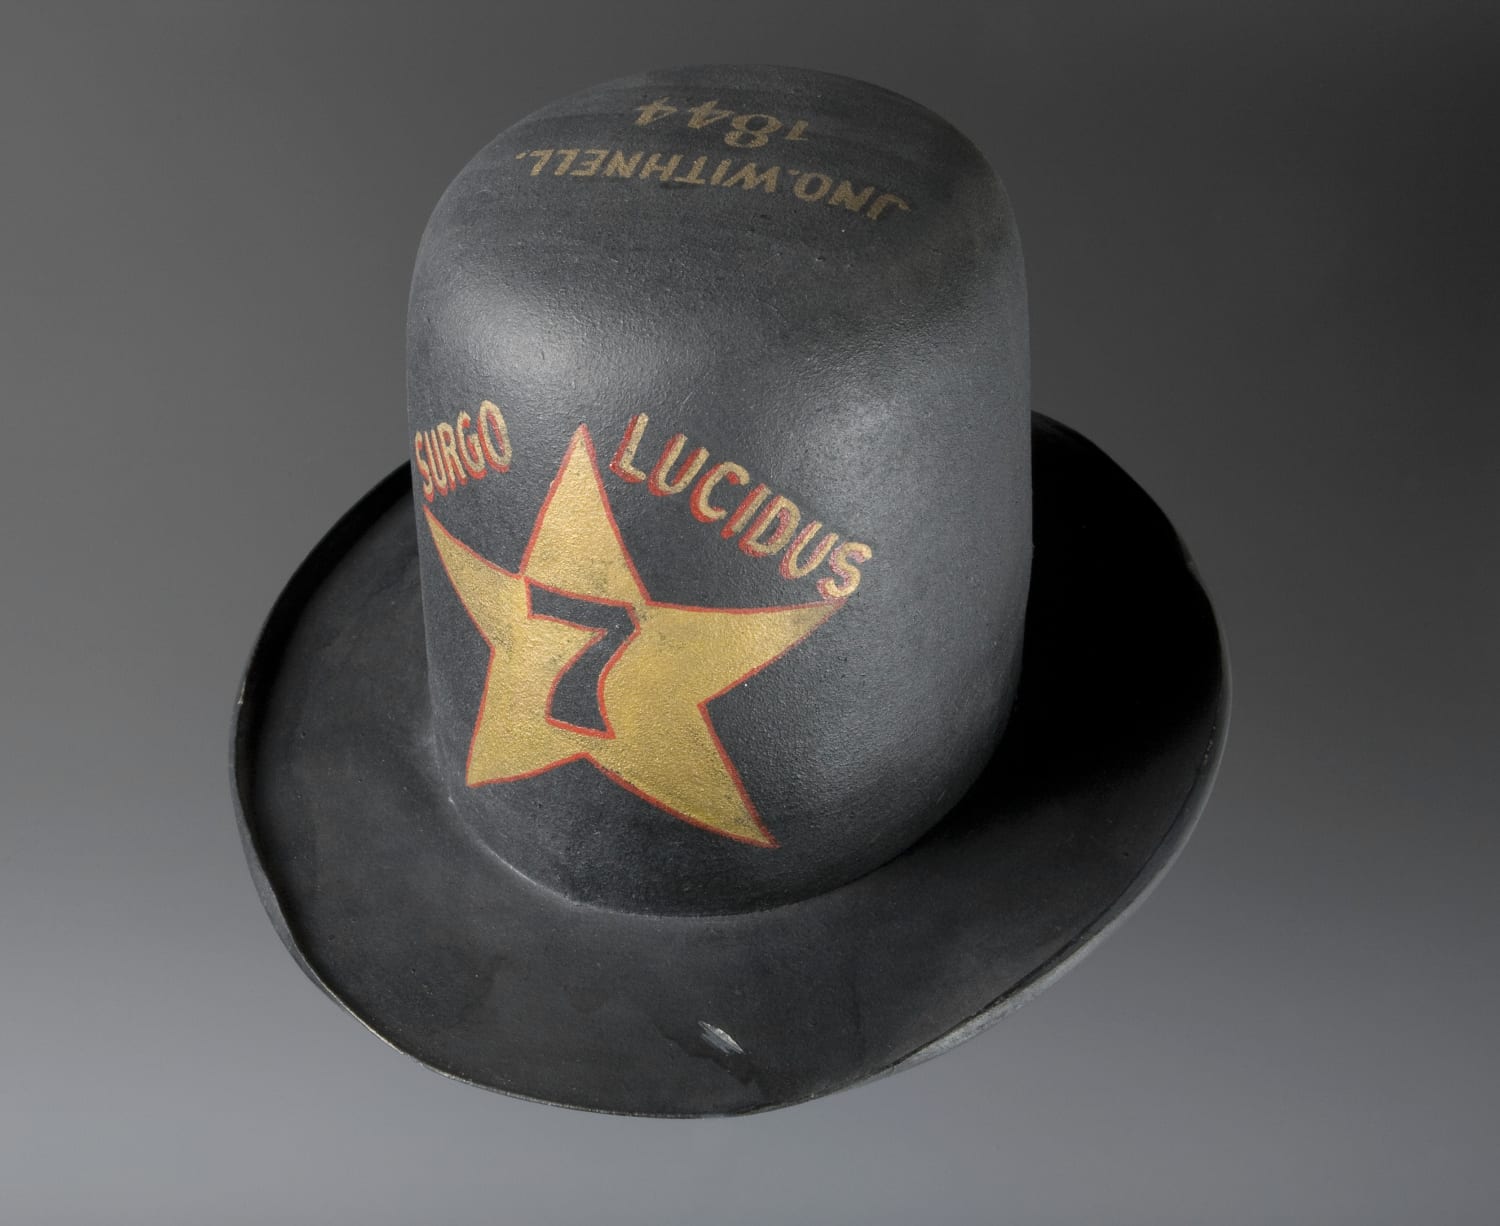 Painted felt hat worn by fireman Jonathan Withnell of Phoenix Fire Co. No. 7 in St. Louis, Missouri, c. 1852.